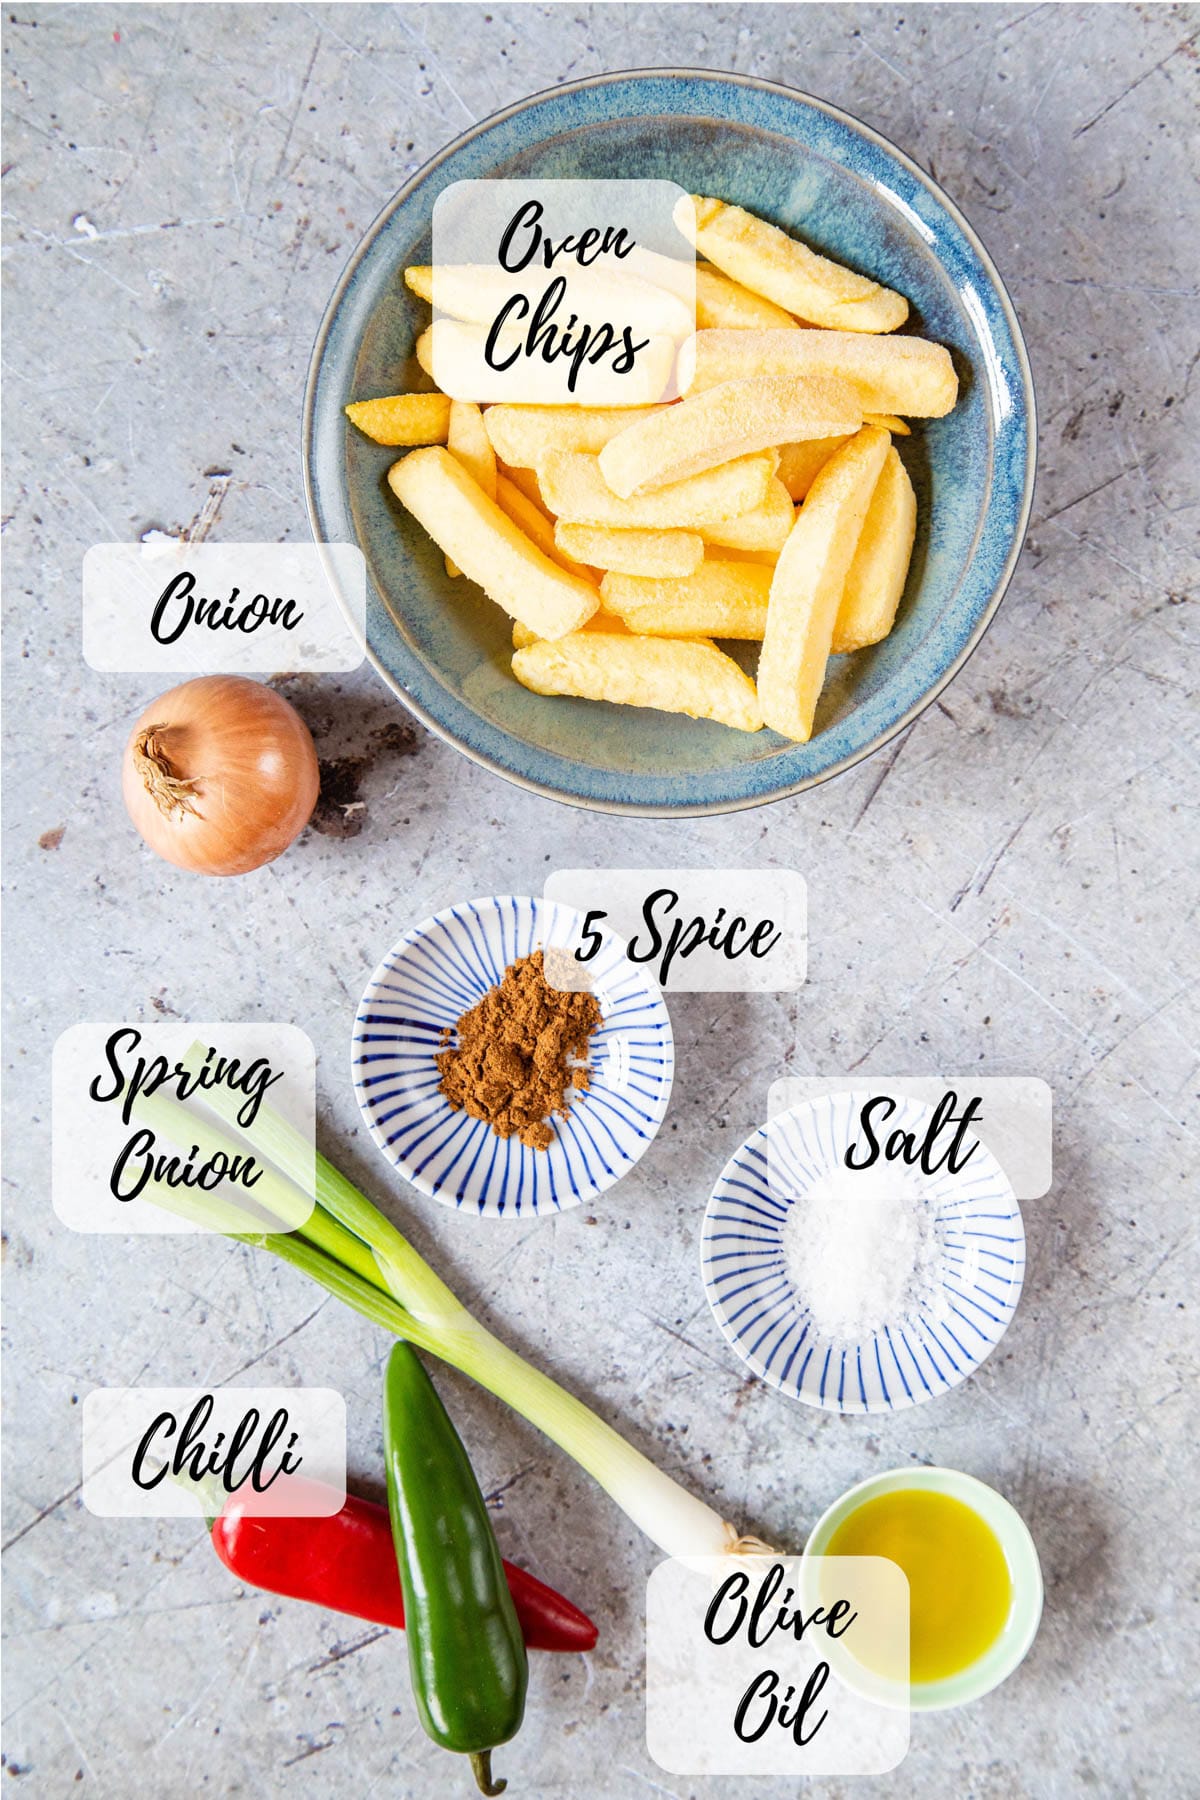 All the ingredients for salt and pepper chips.